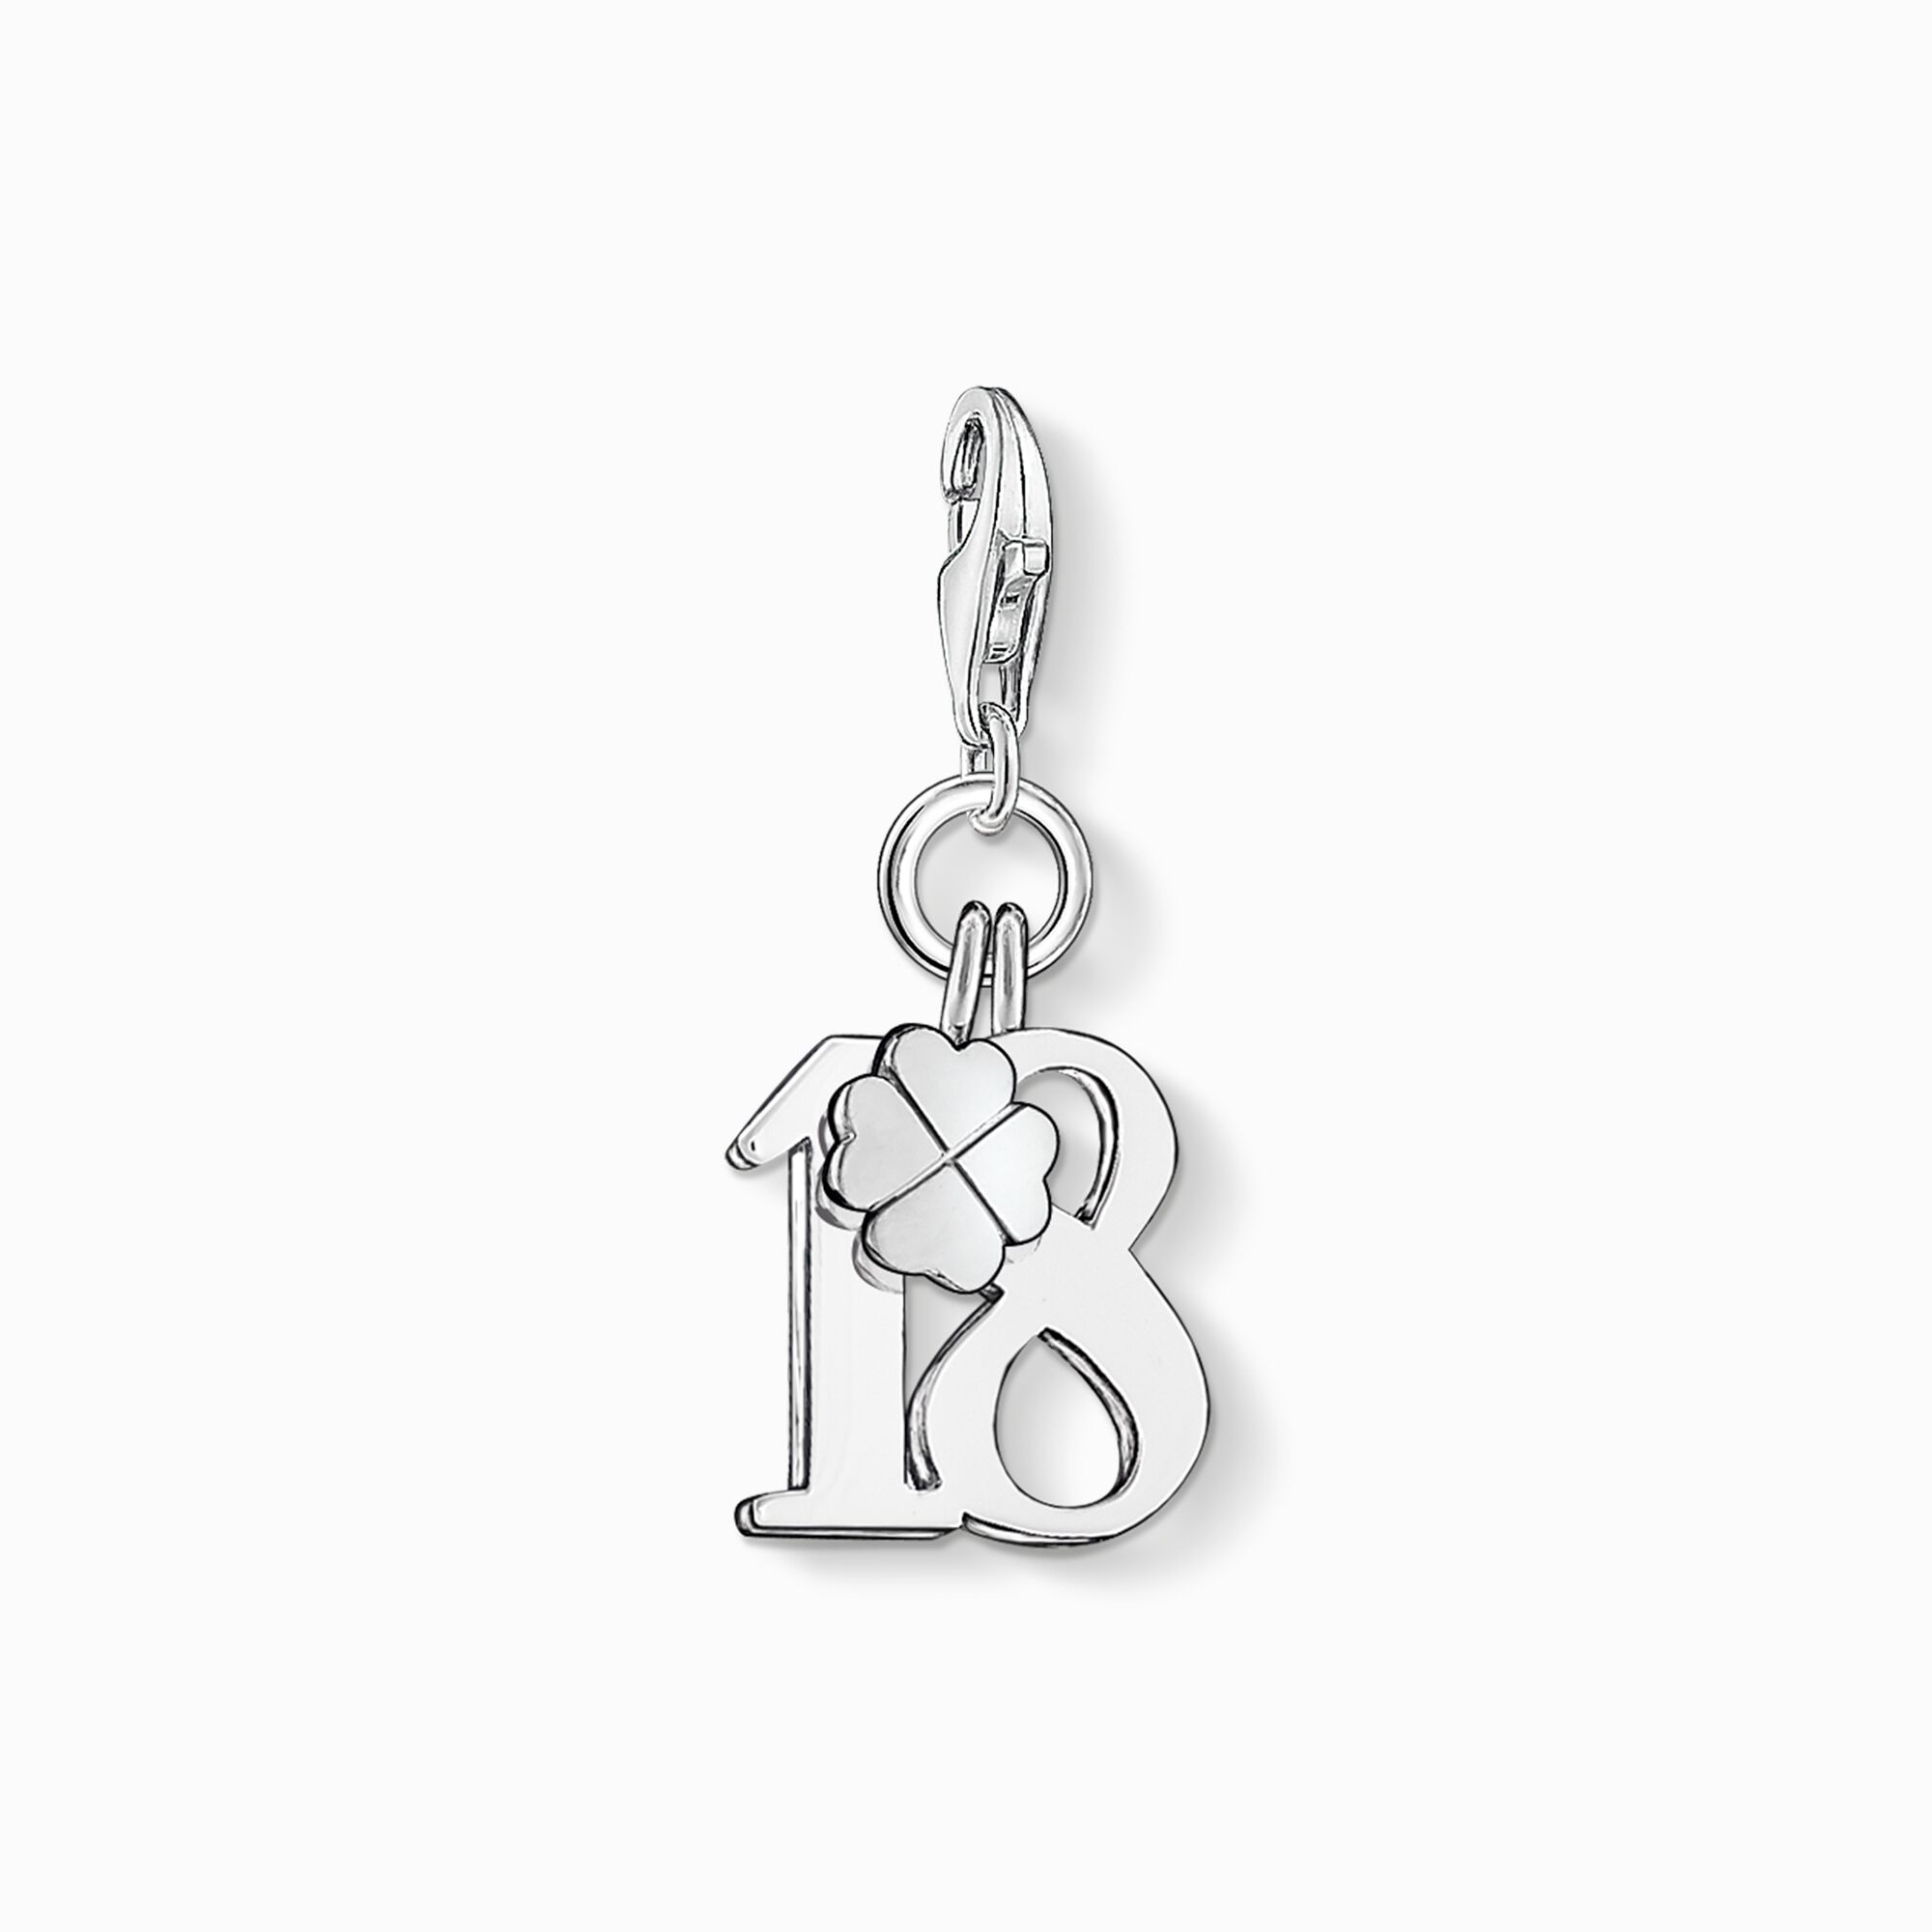 Charm pendant lucky number 18 from the Charm Club collection in the THOMAS SABO online store